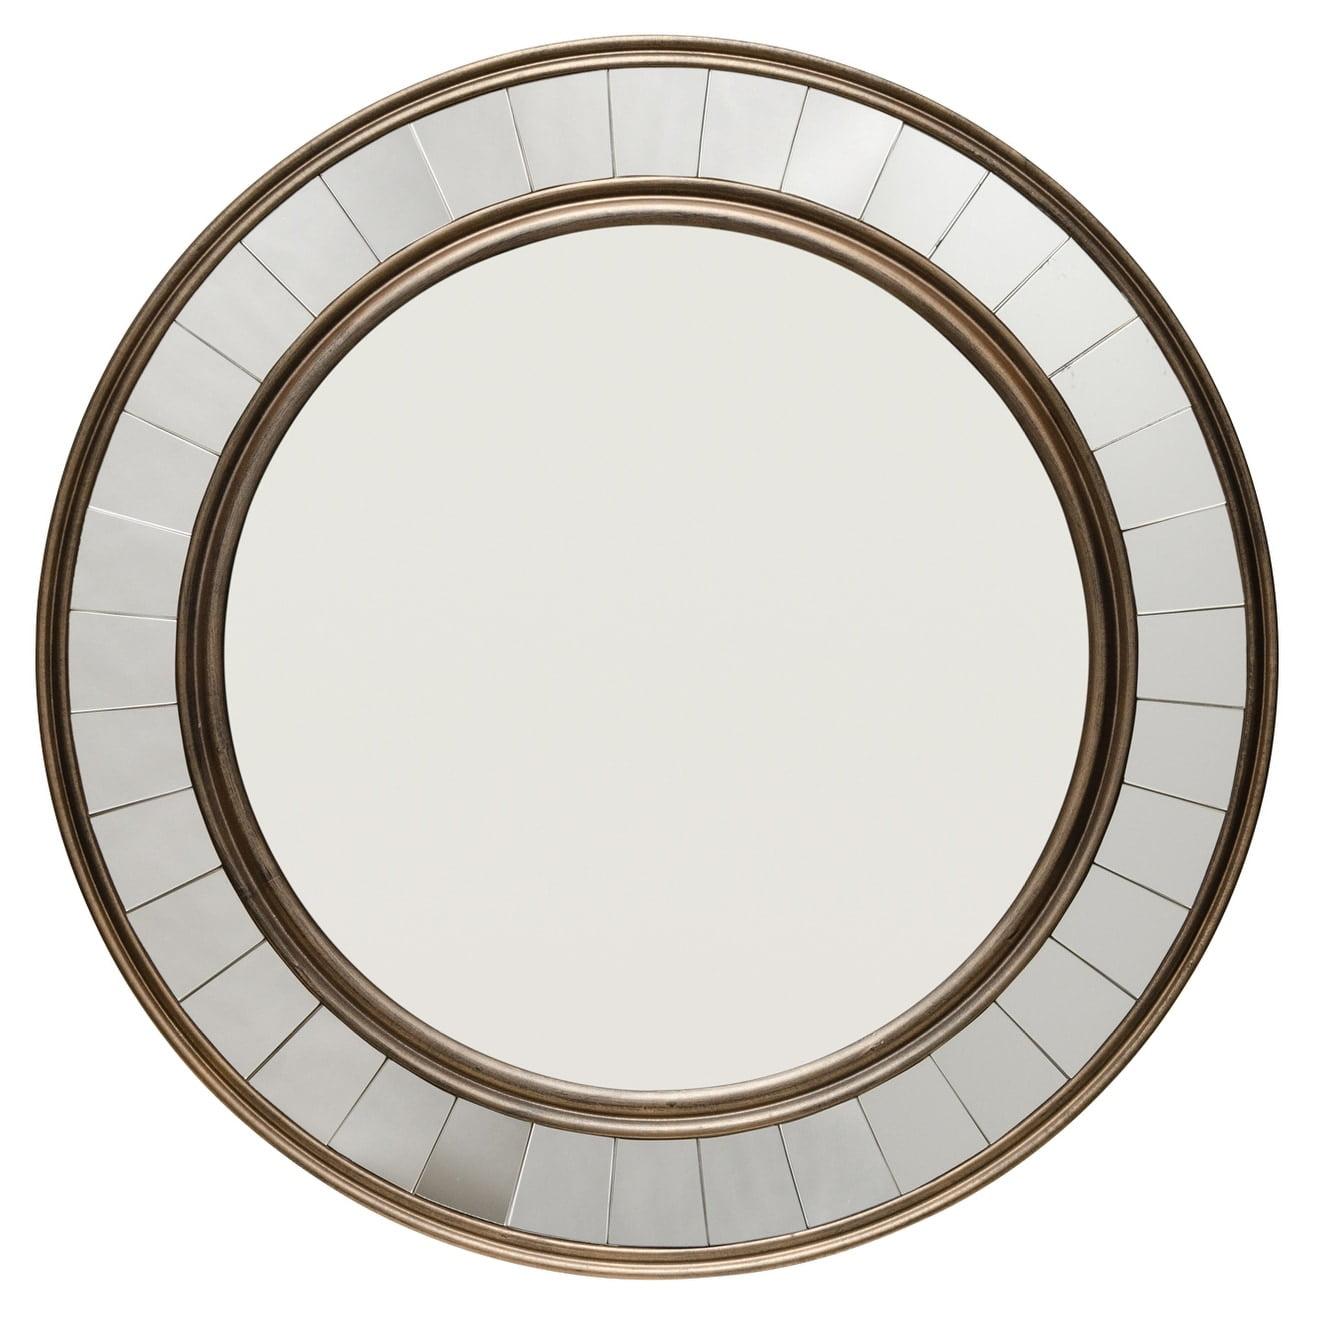 Eloise Round Antique Bronze and Gold Wood Wall Mirror - 30.5"